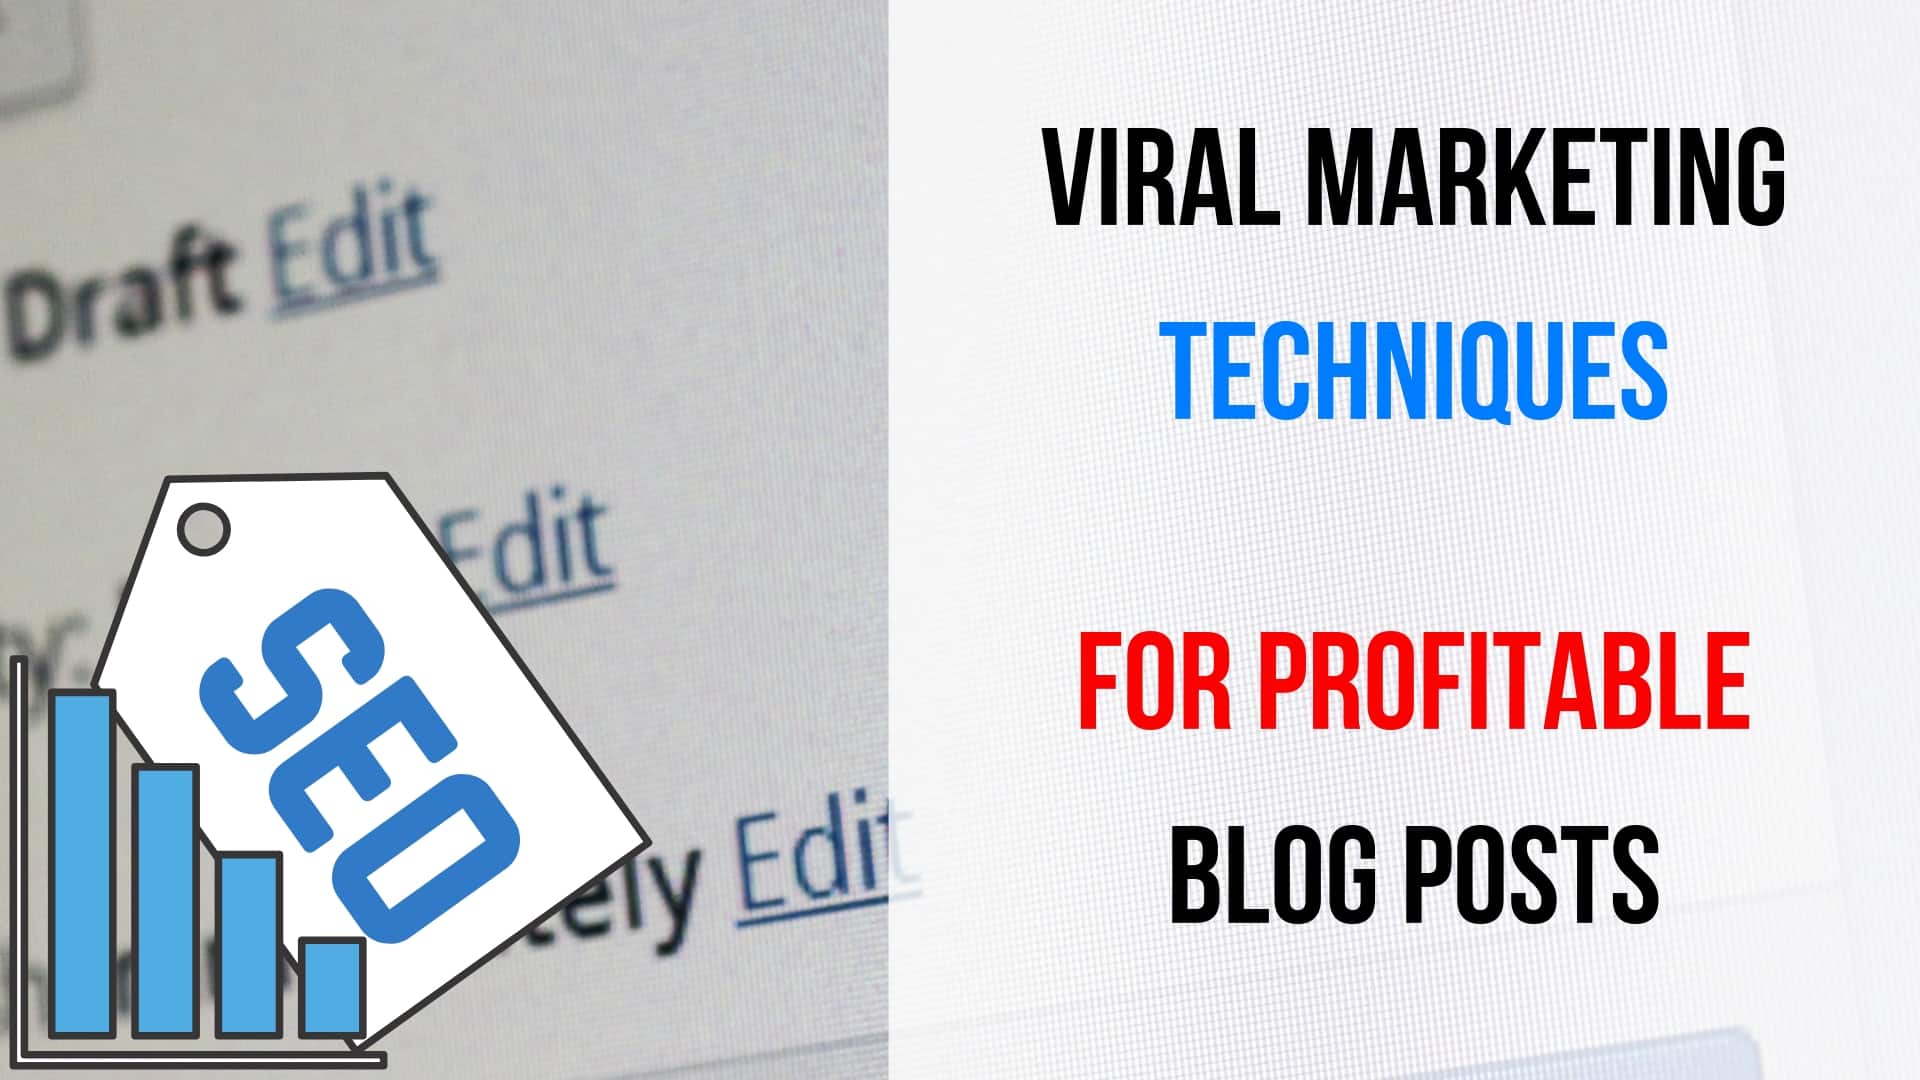 Viral marketing techniques for profitable blog posts